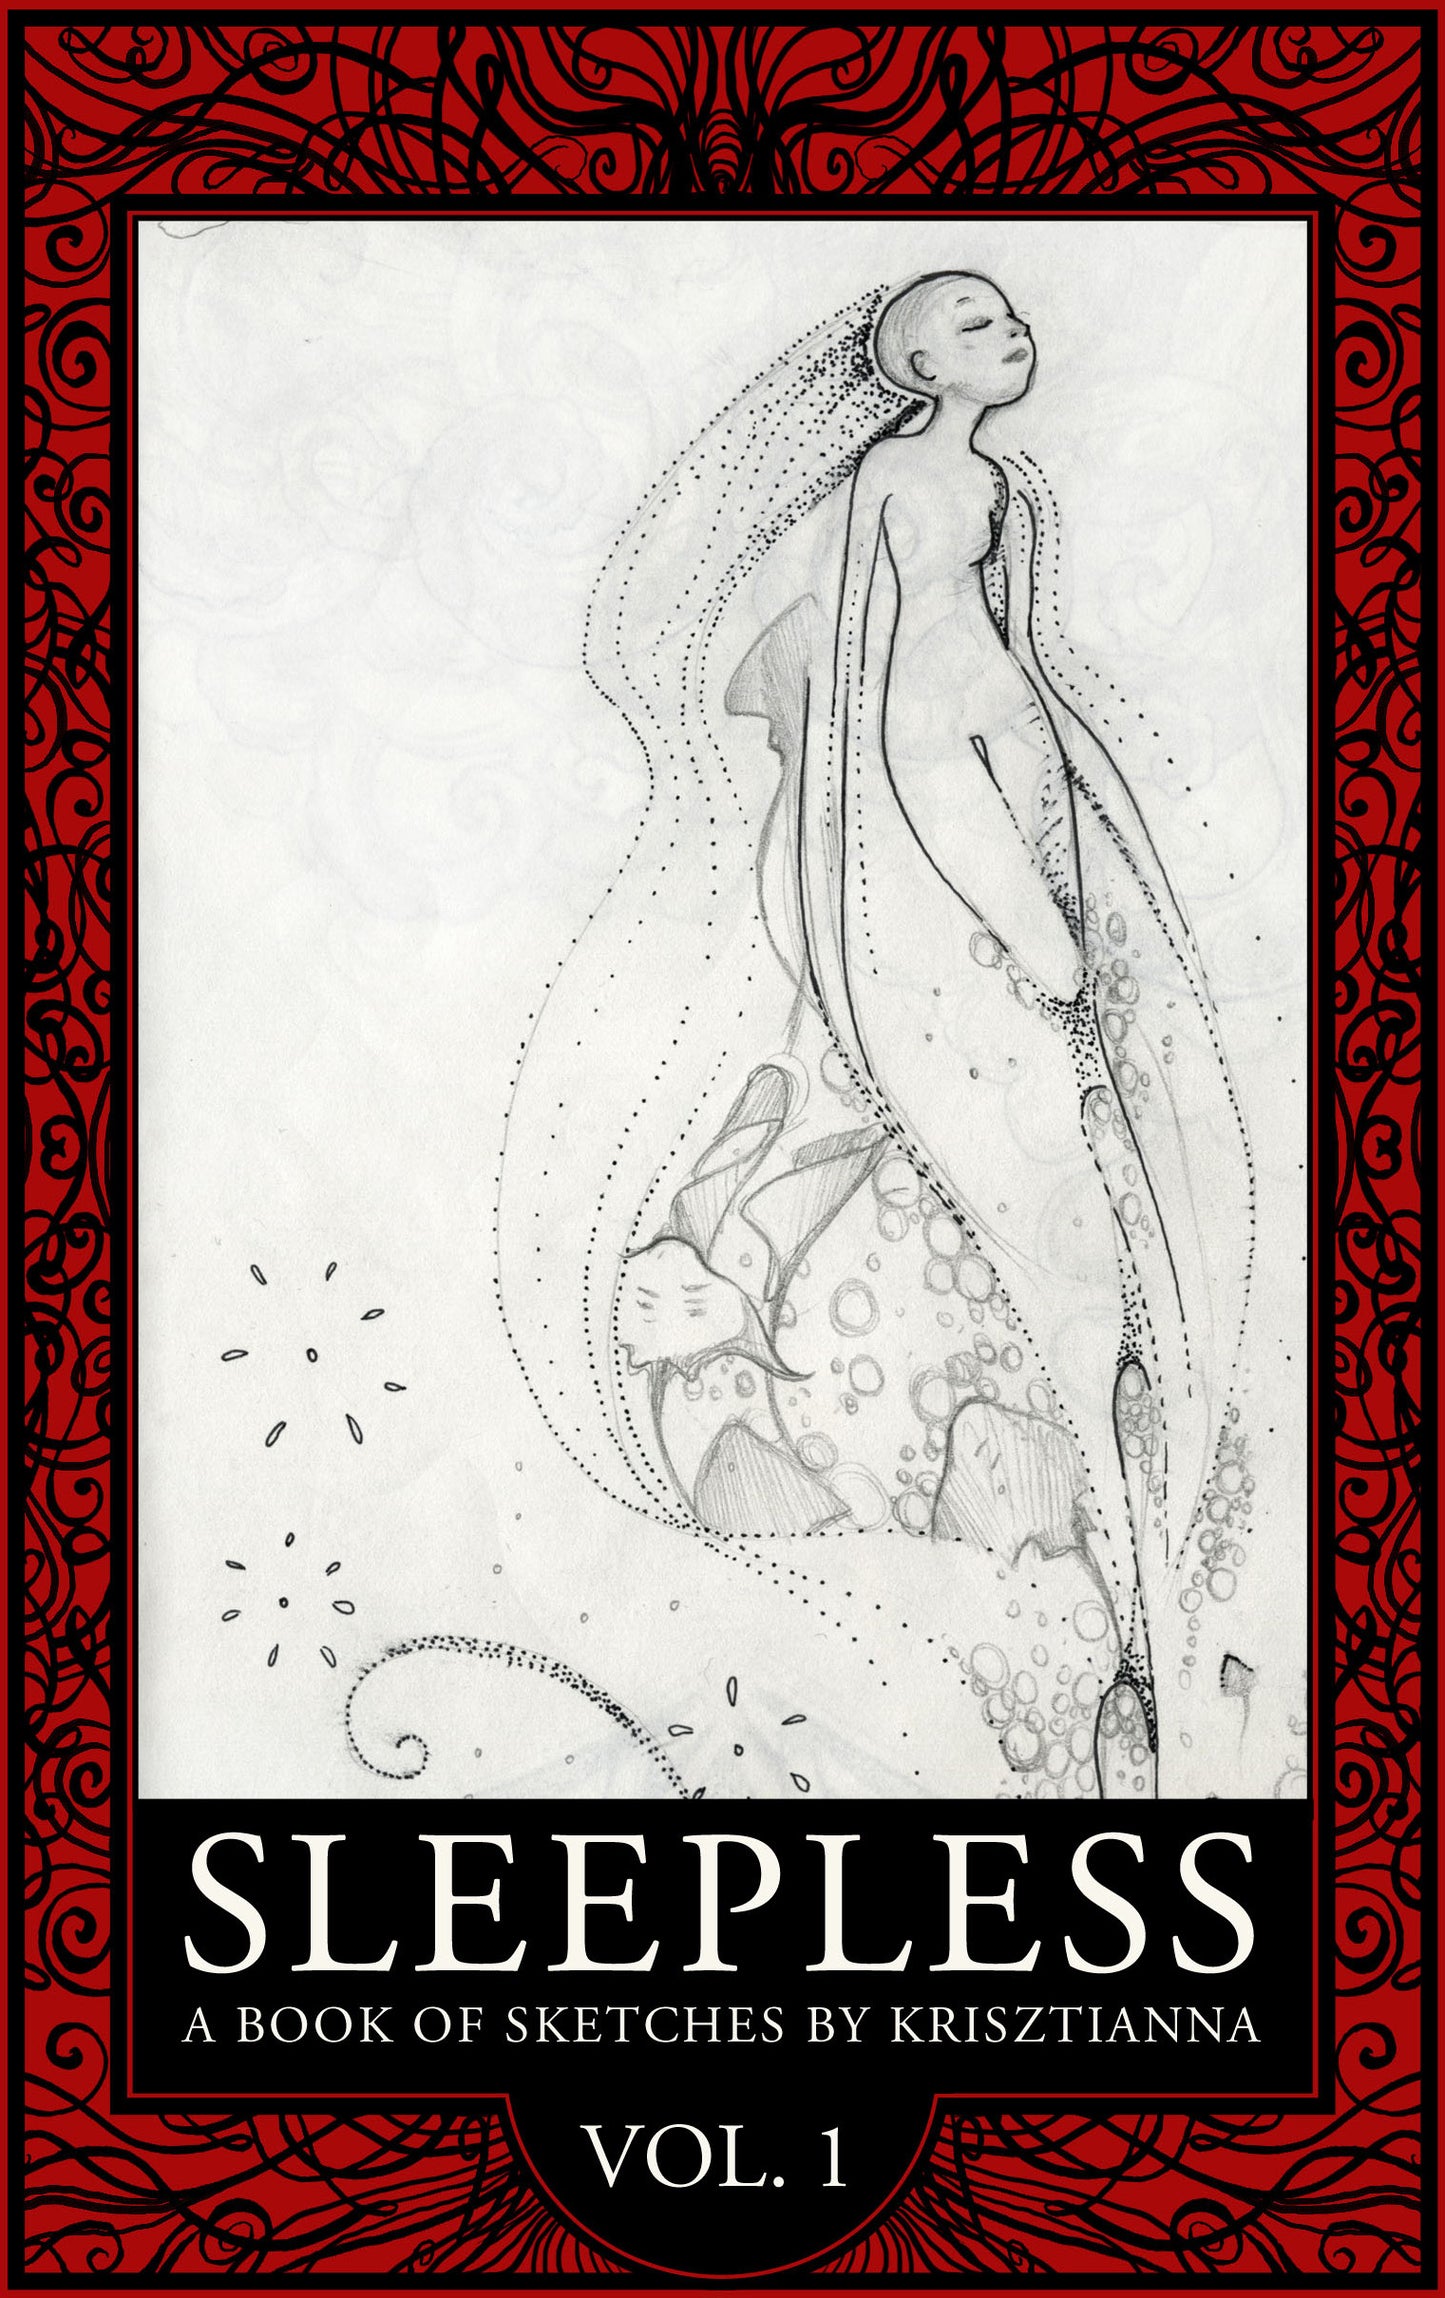 "Sleepless Volume 01" A Graphic Novel and Sketchbook